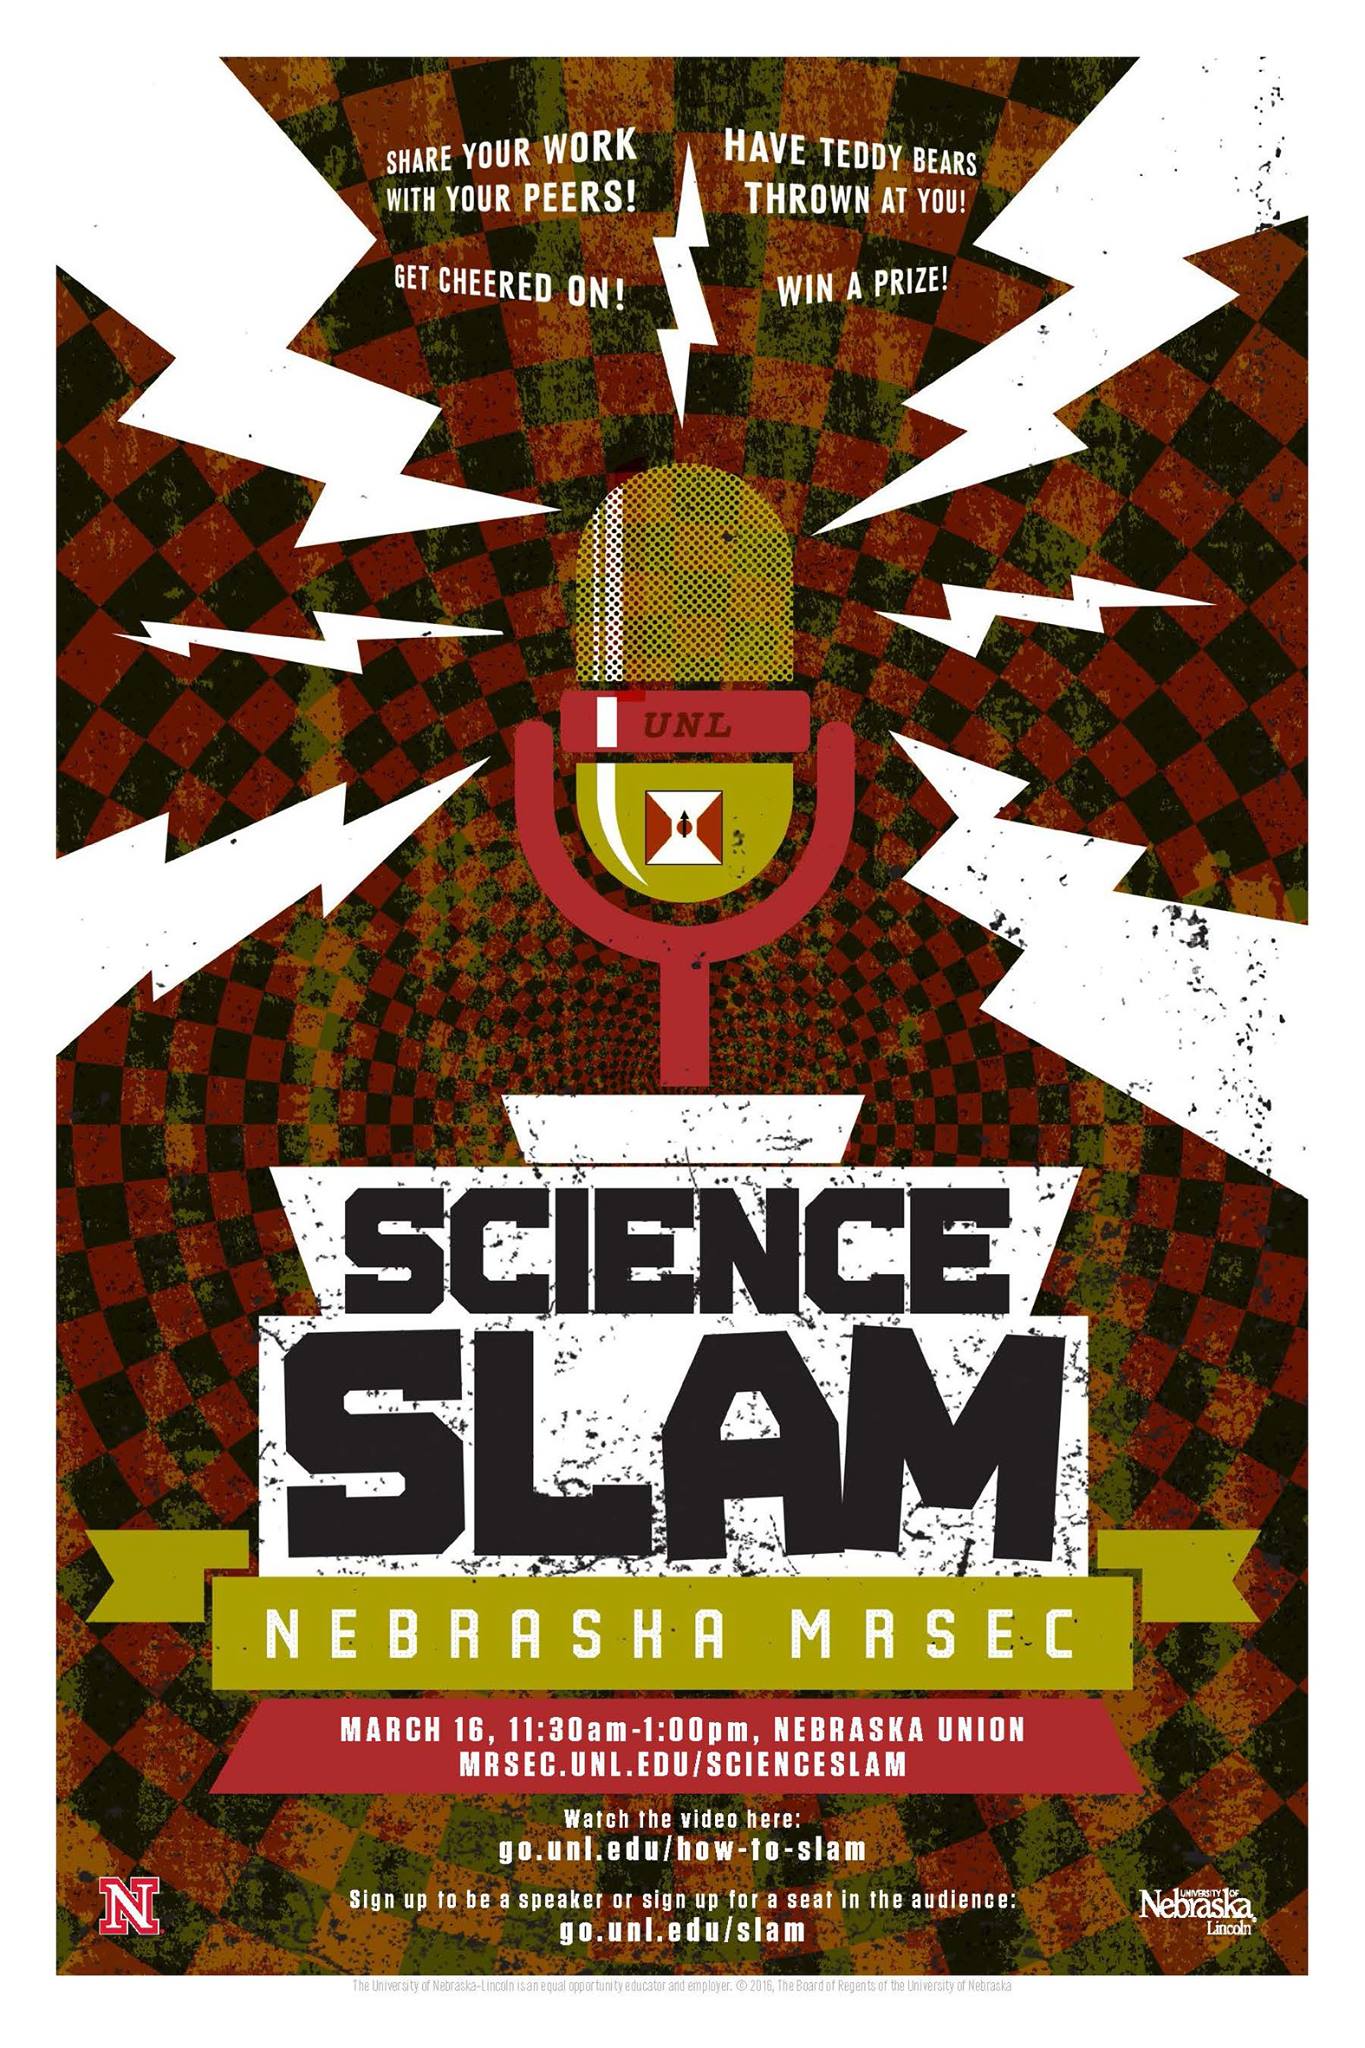 Science Slam is March 16.